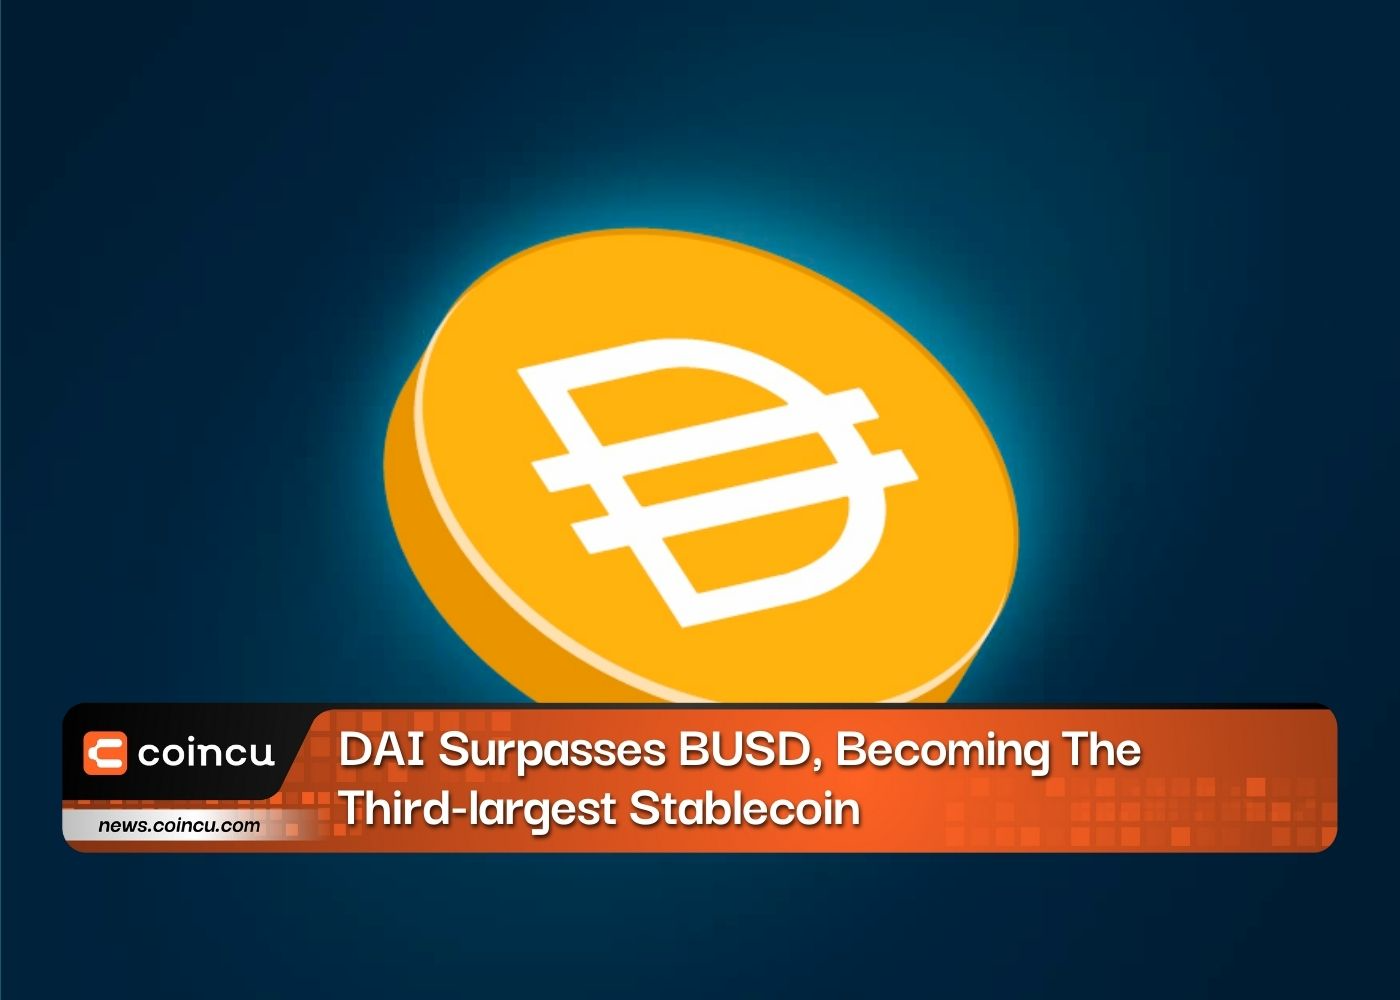 Data: DAI Surpasses BUSD, Becoming The Third-largest Stablecoin